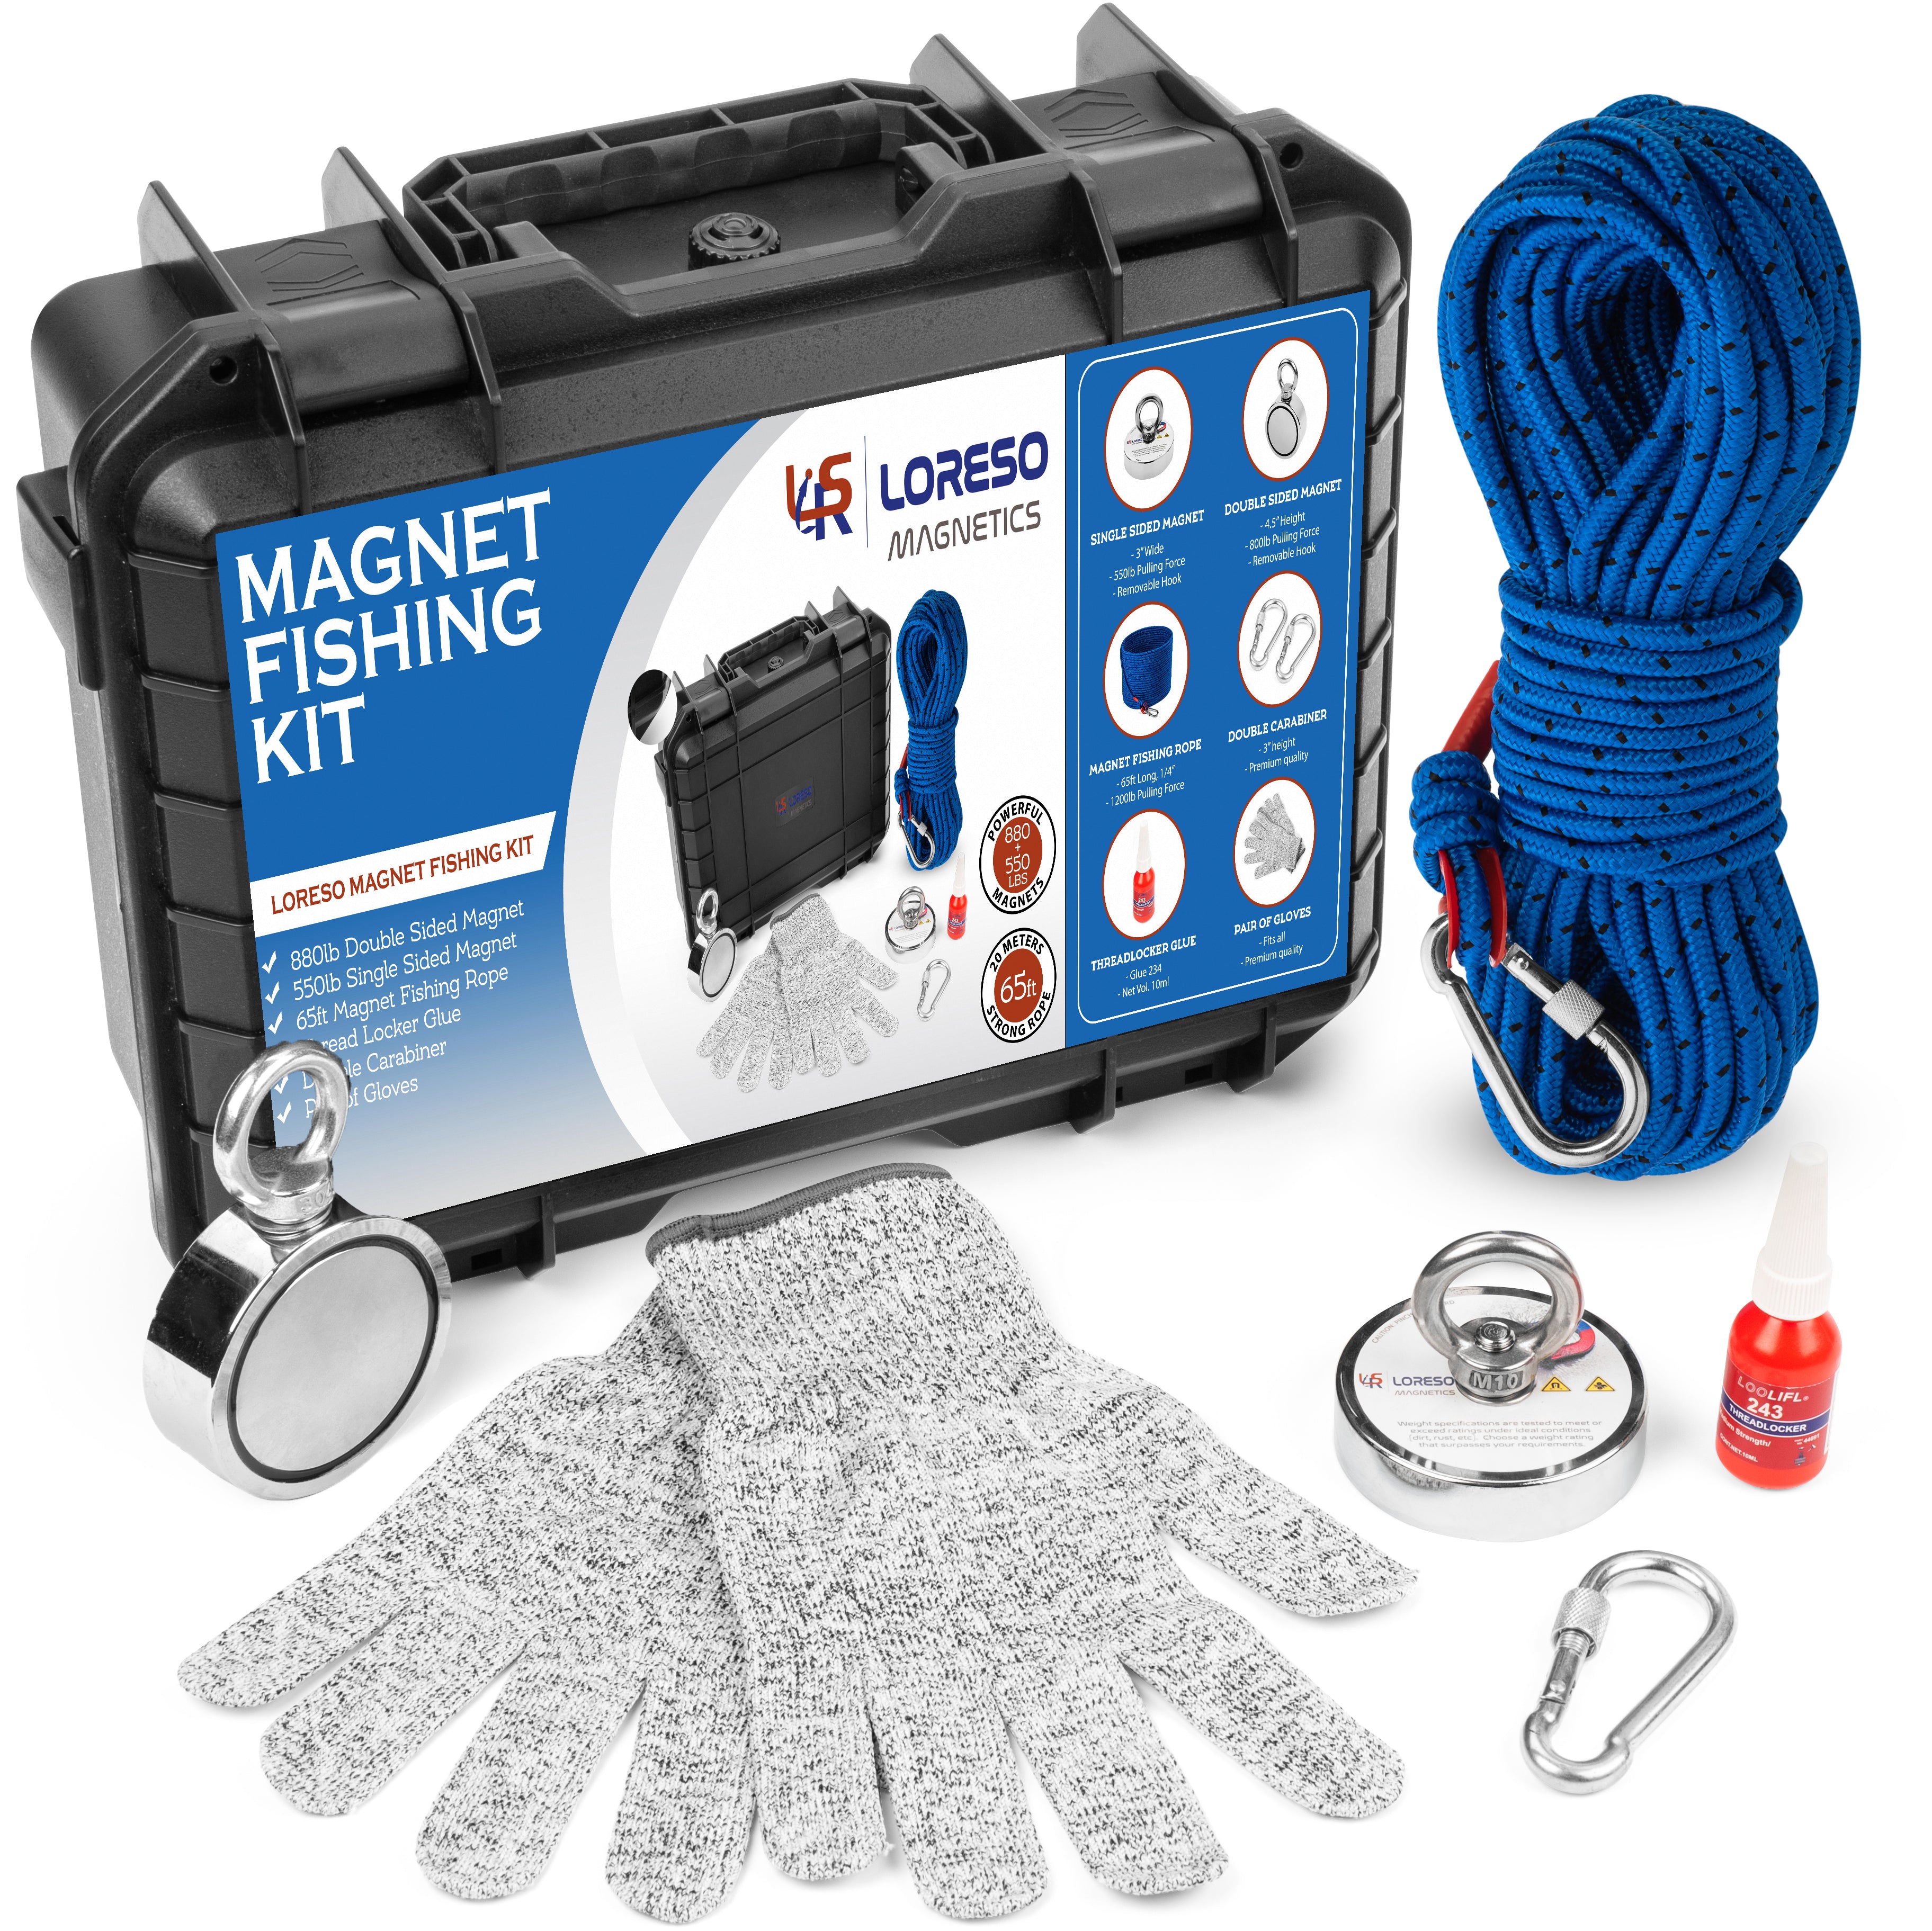 Grappling Hook Kit - Heavy Duty 4 Claw Grappling Hook Stainless Steel + Rope 1/3 inch 1200lb Strength, Large Throwable Grapple Claw, Blue